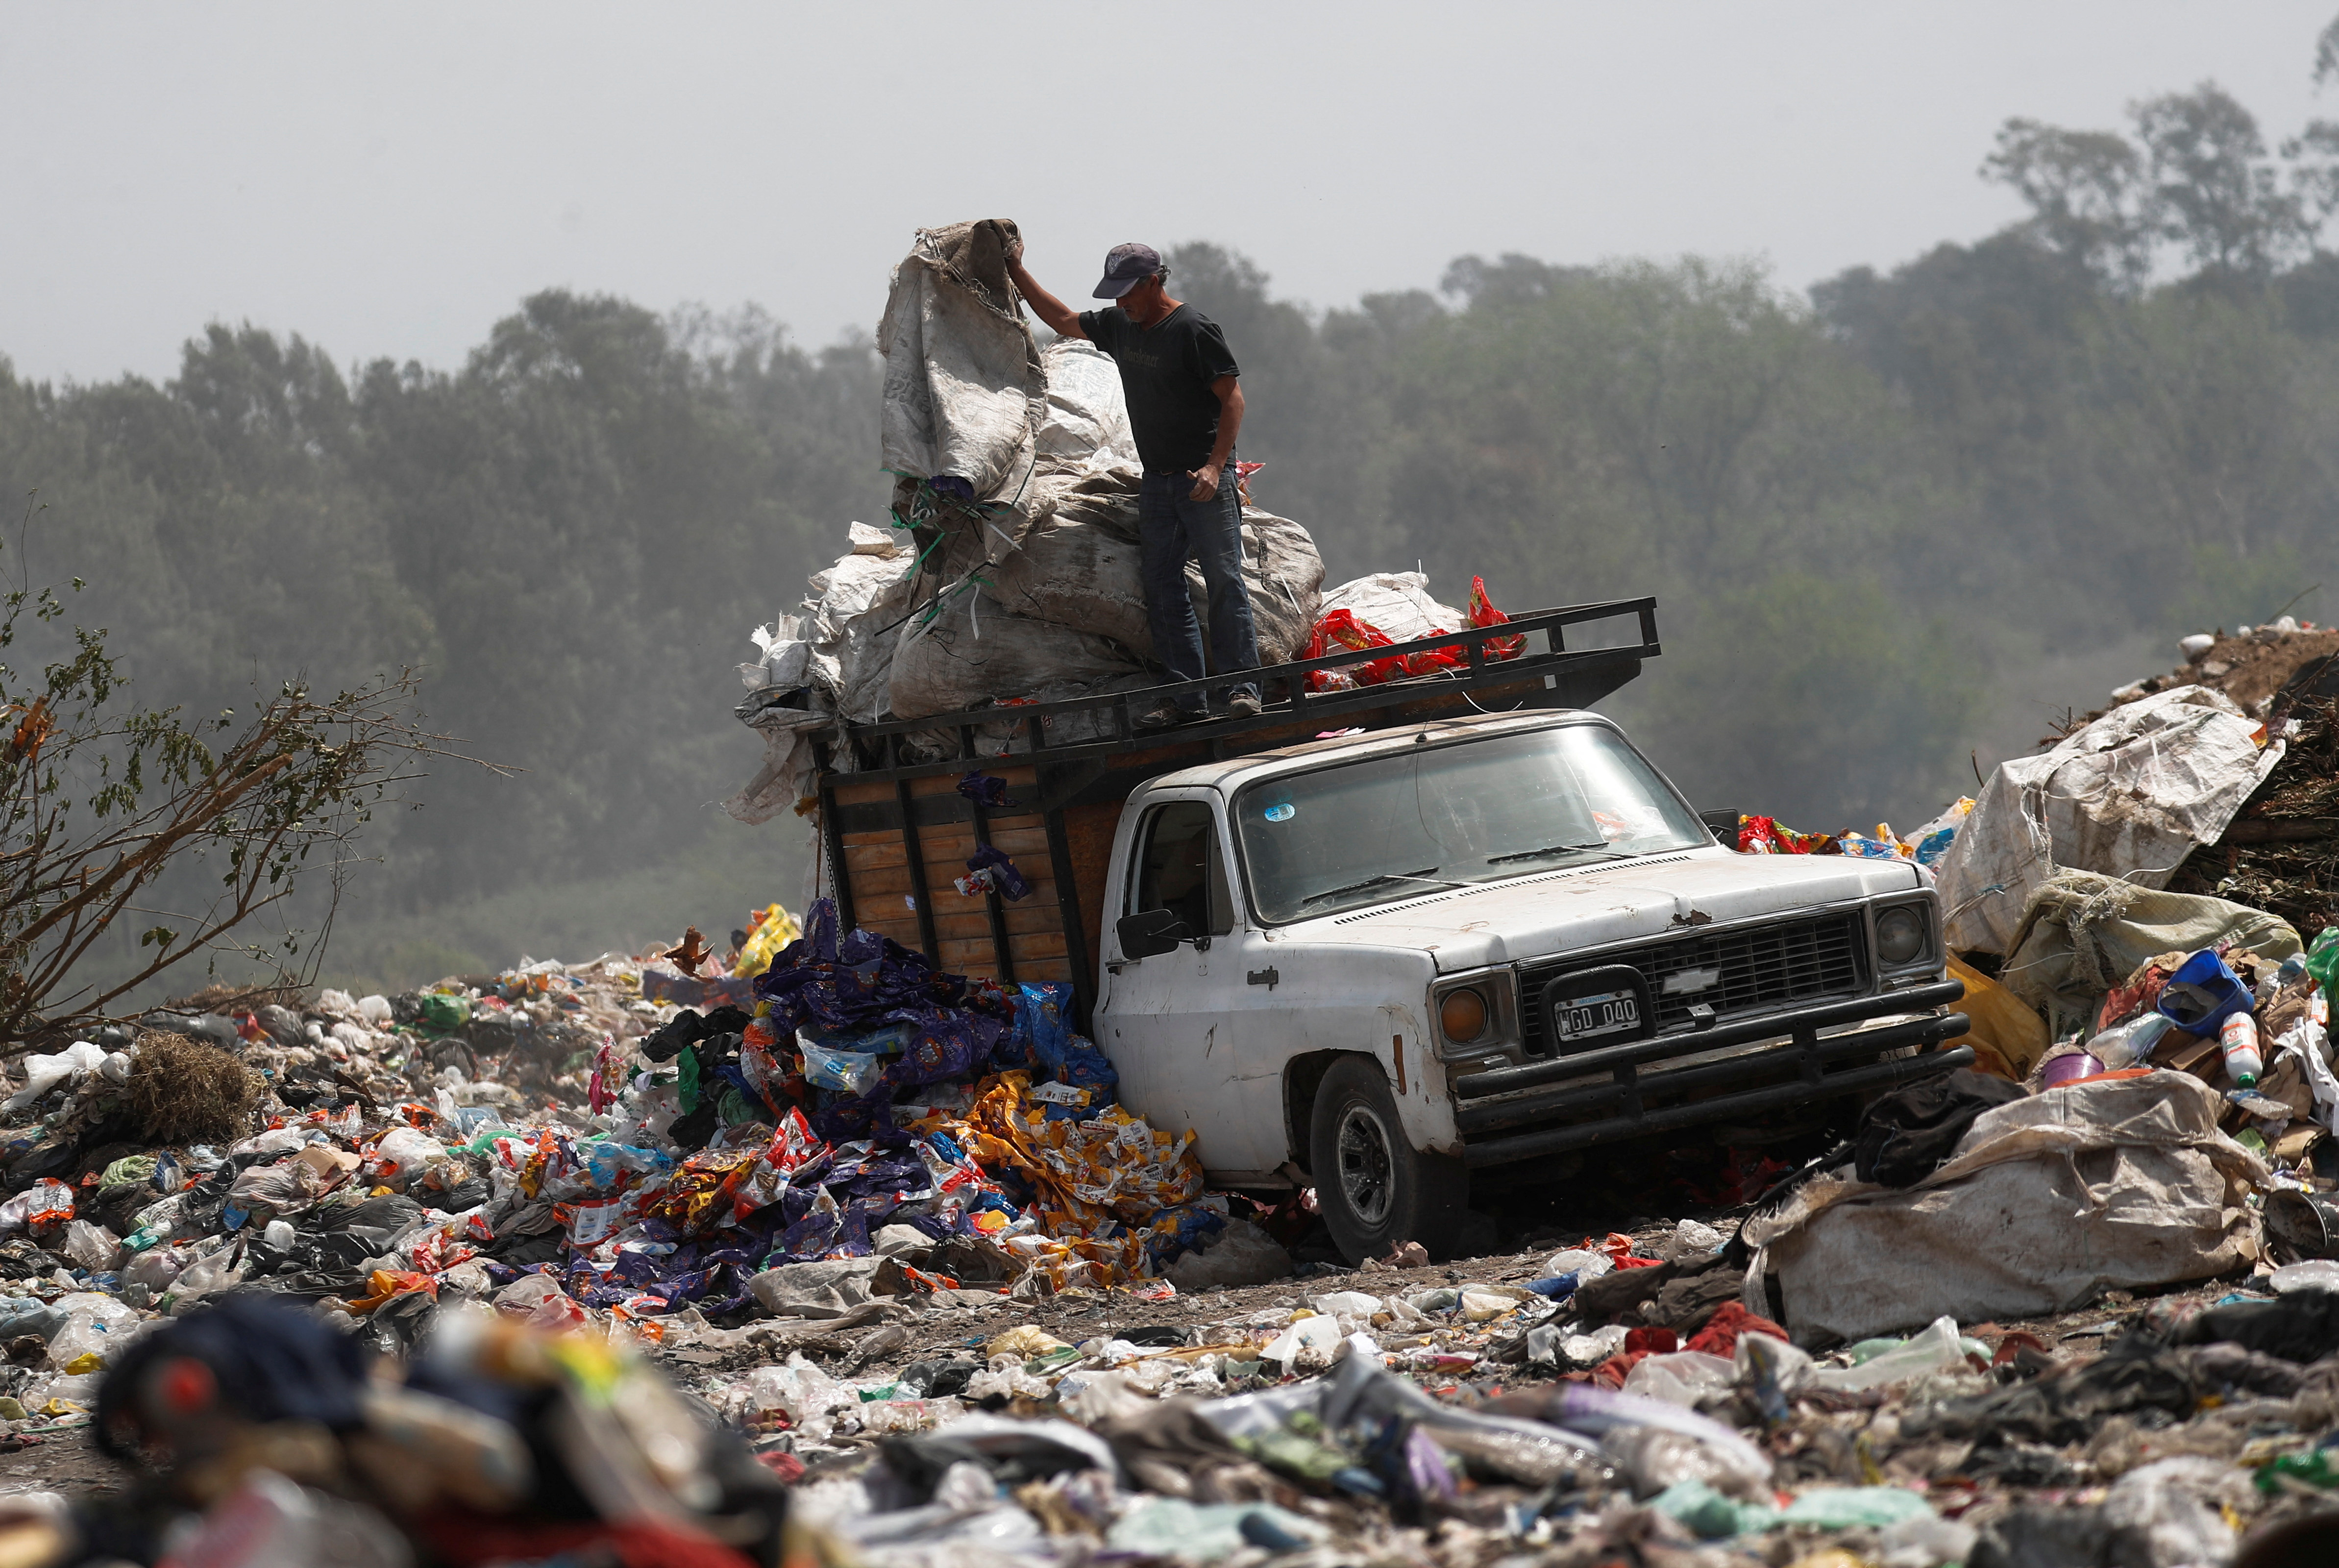 Barter clubs and rubbish dumps: poor Argentines feel the pain of 100% inflation